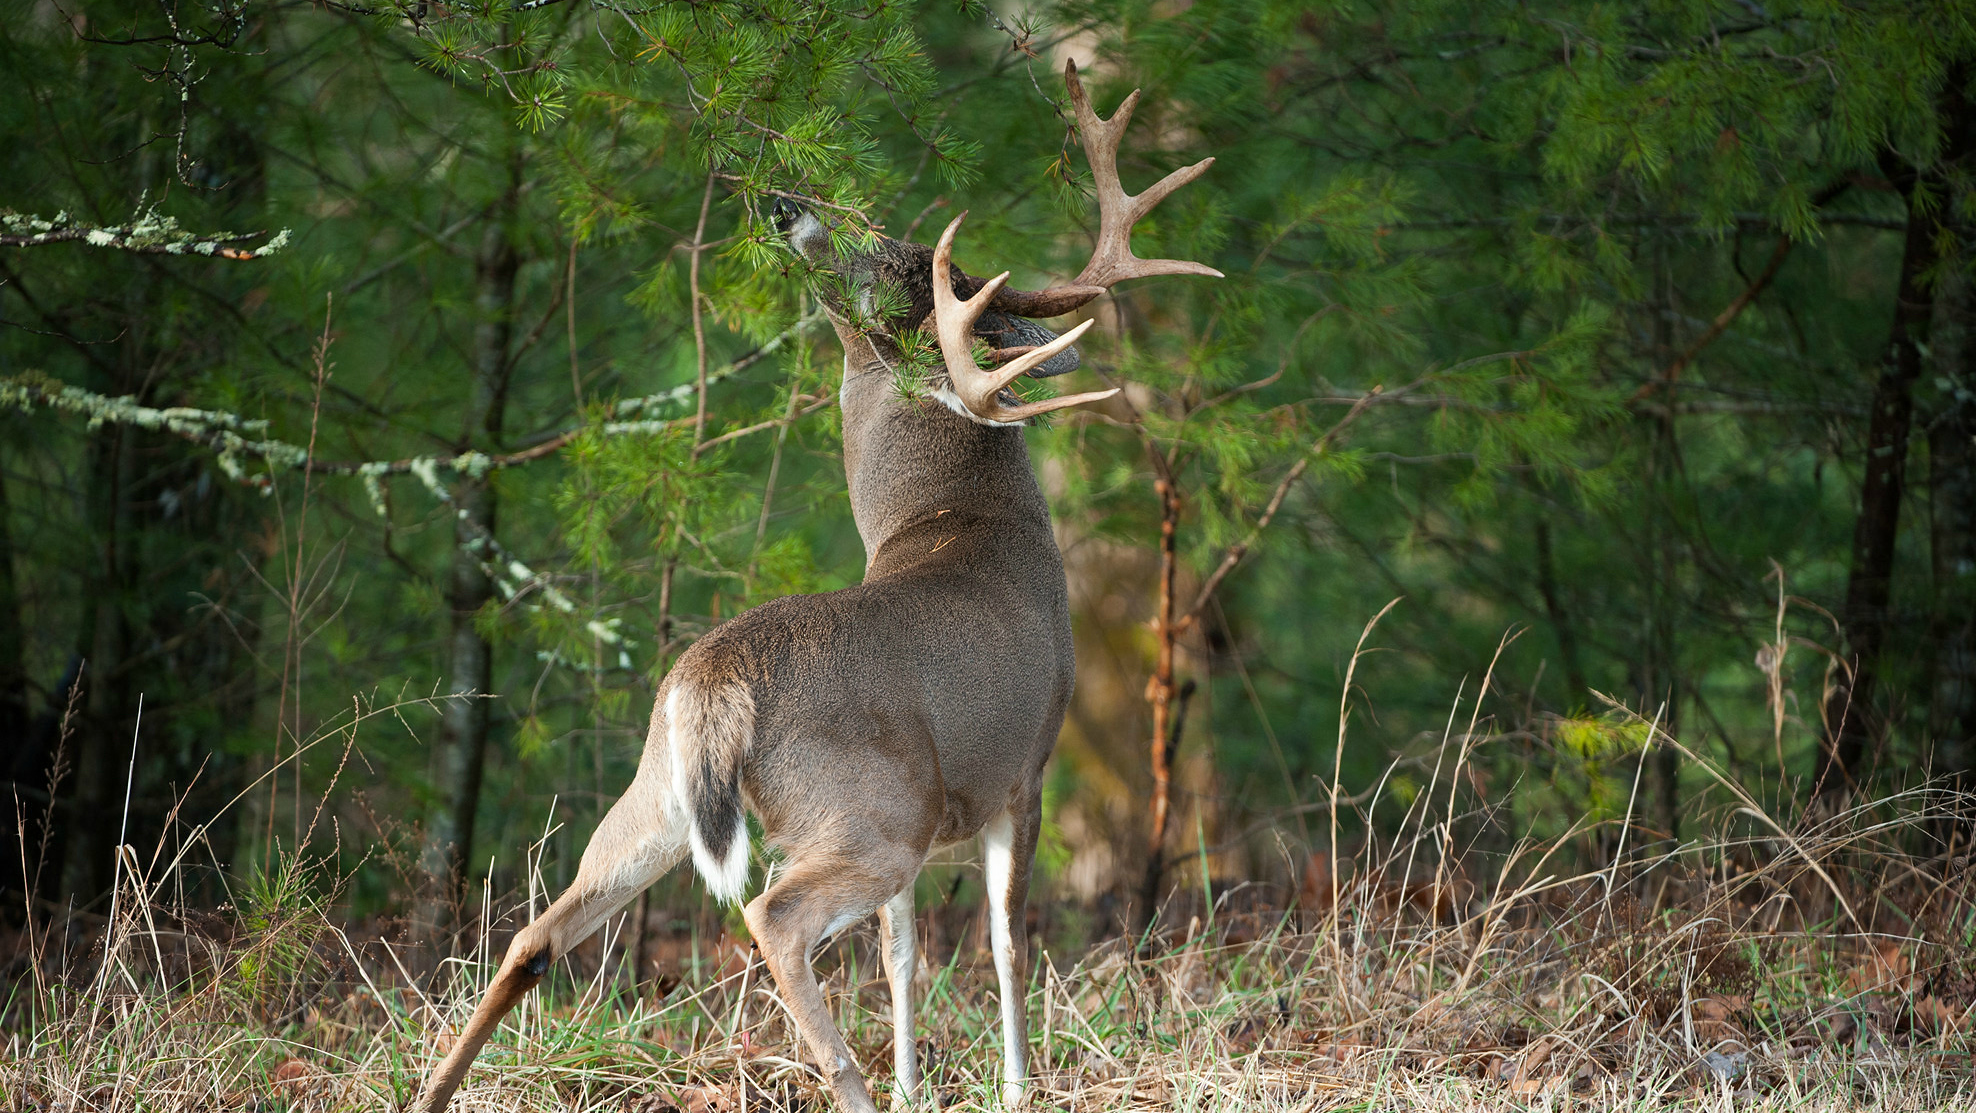 Human or Deer Urine Does It Make a Difference? MeatEater Wired To Hunt